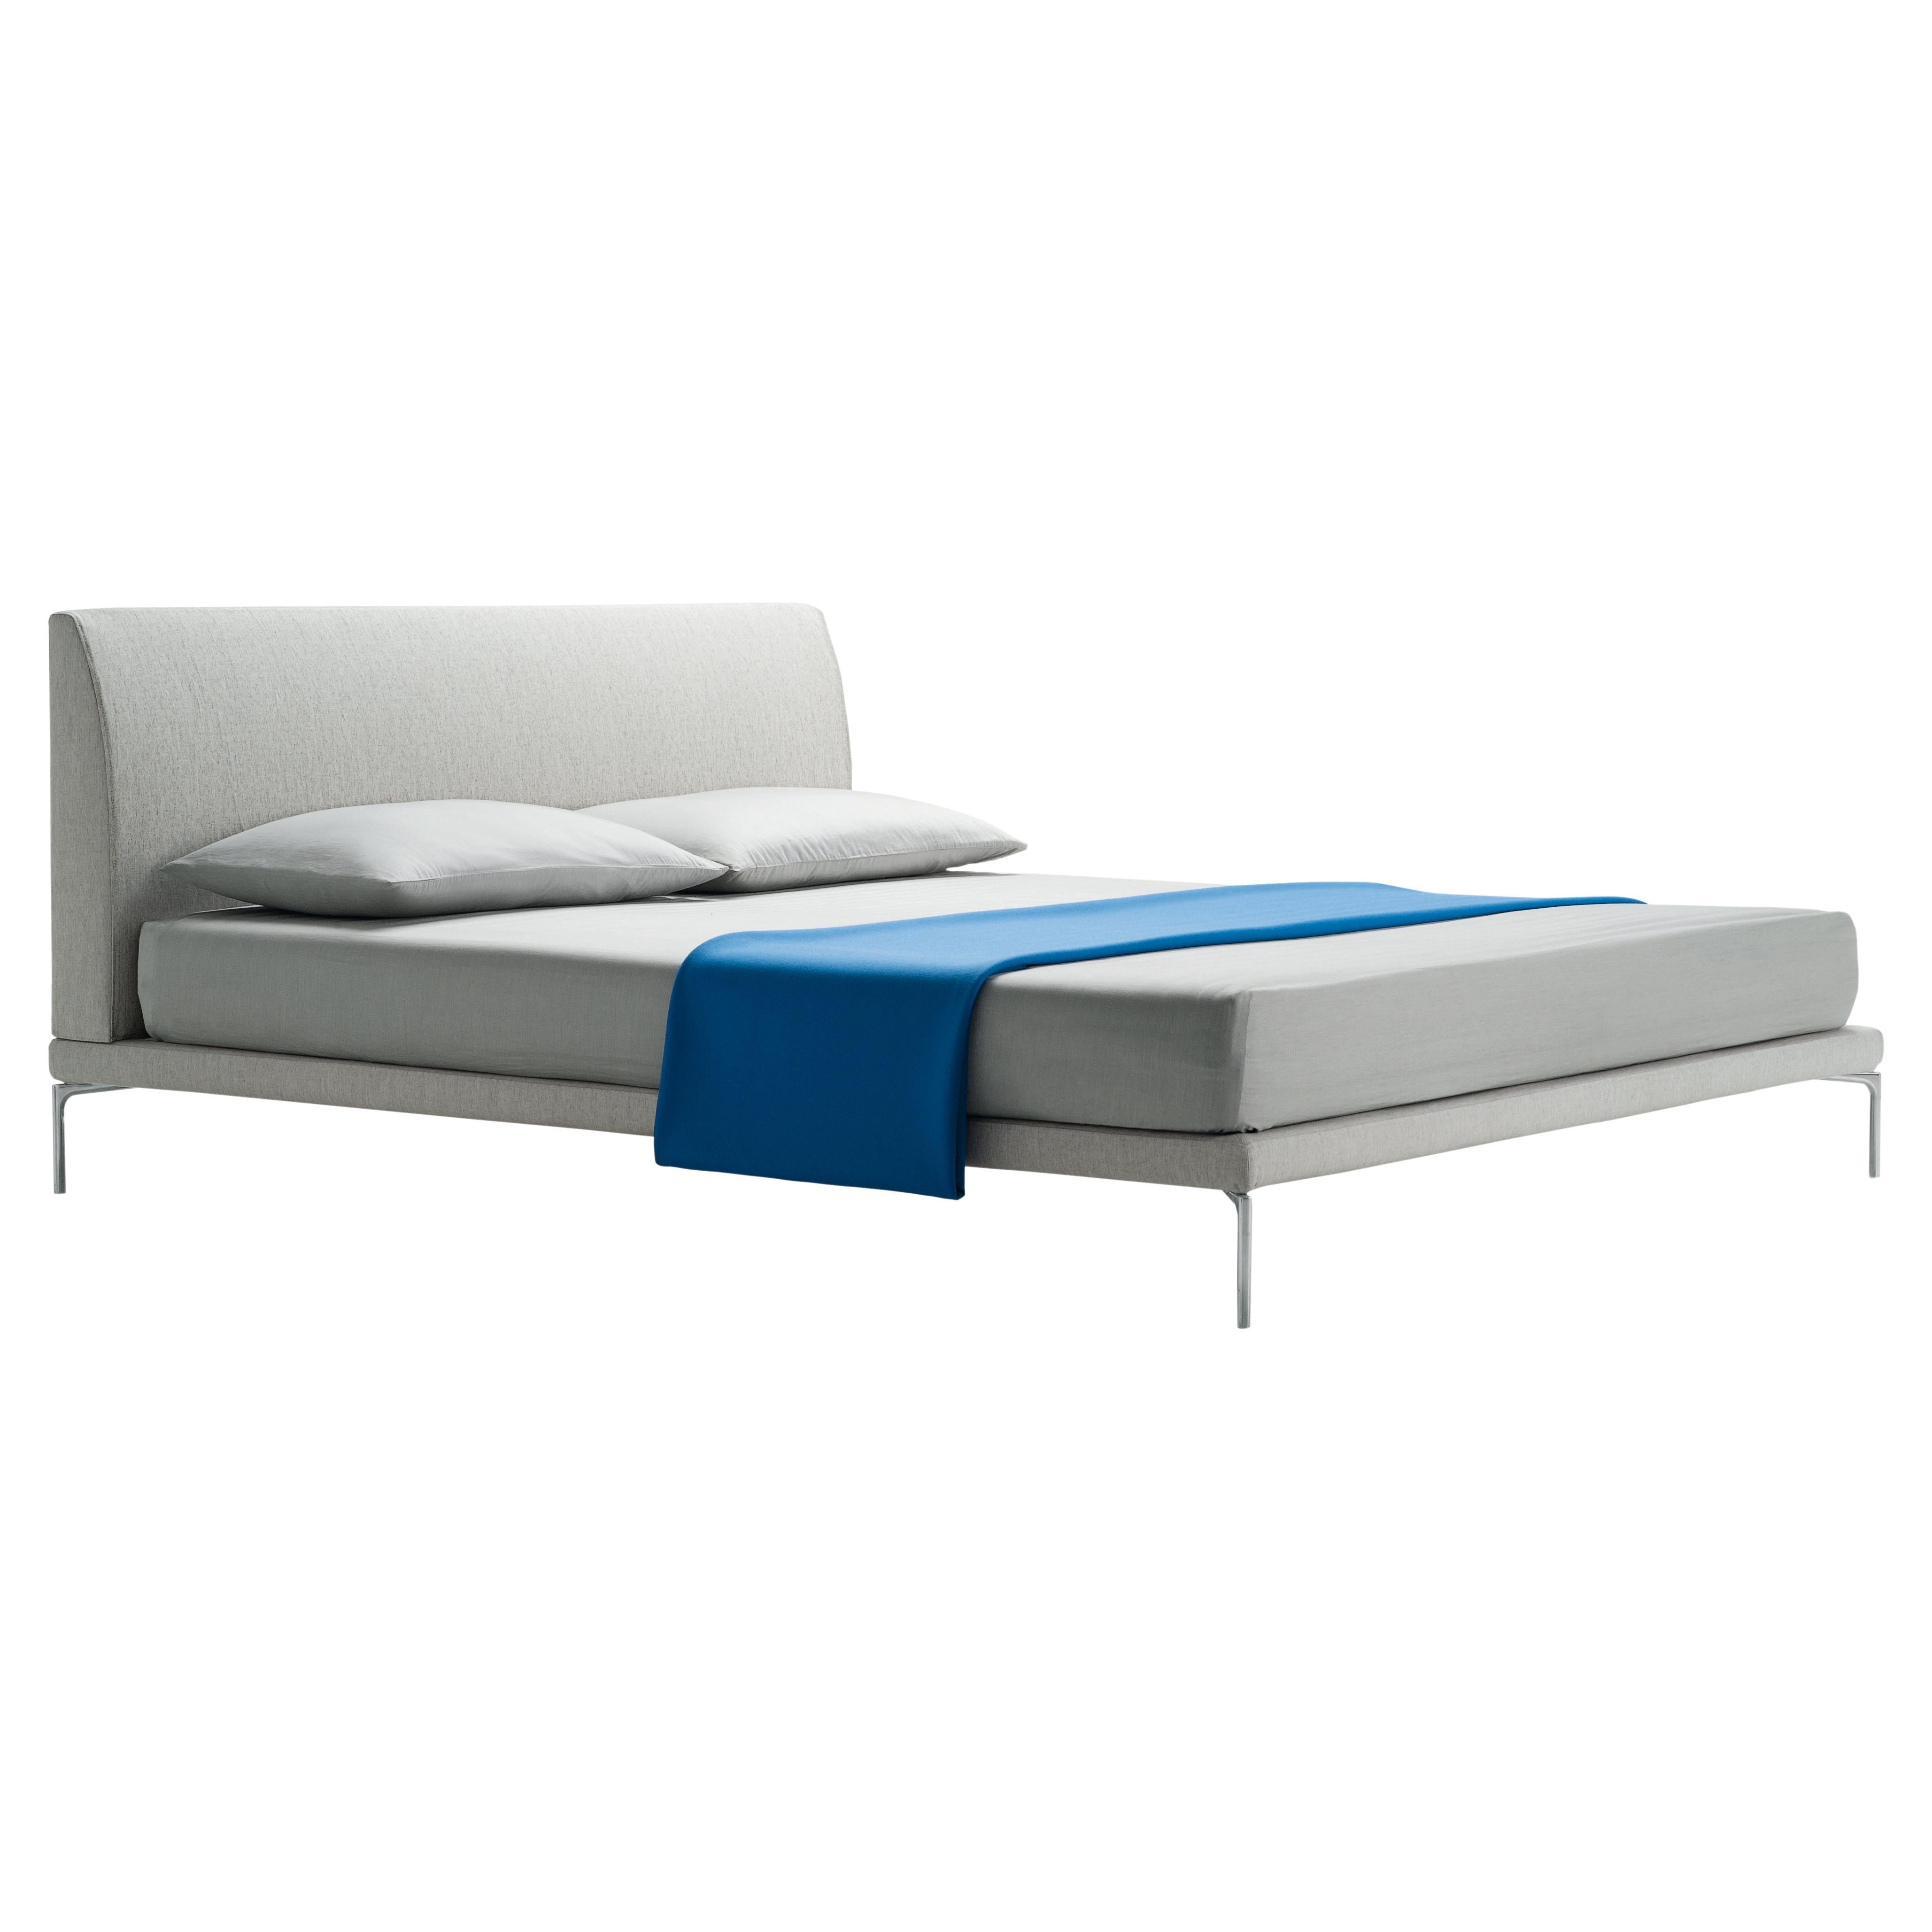 Zanotta Large Talamo Bed with Single Springing in Grey Upholstery For Sale